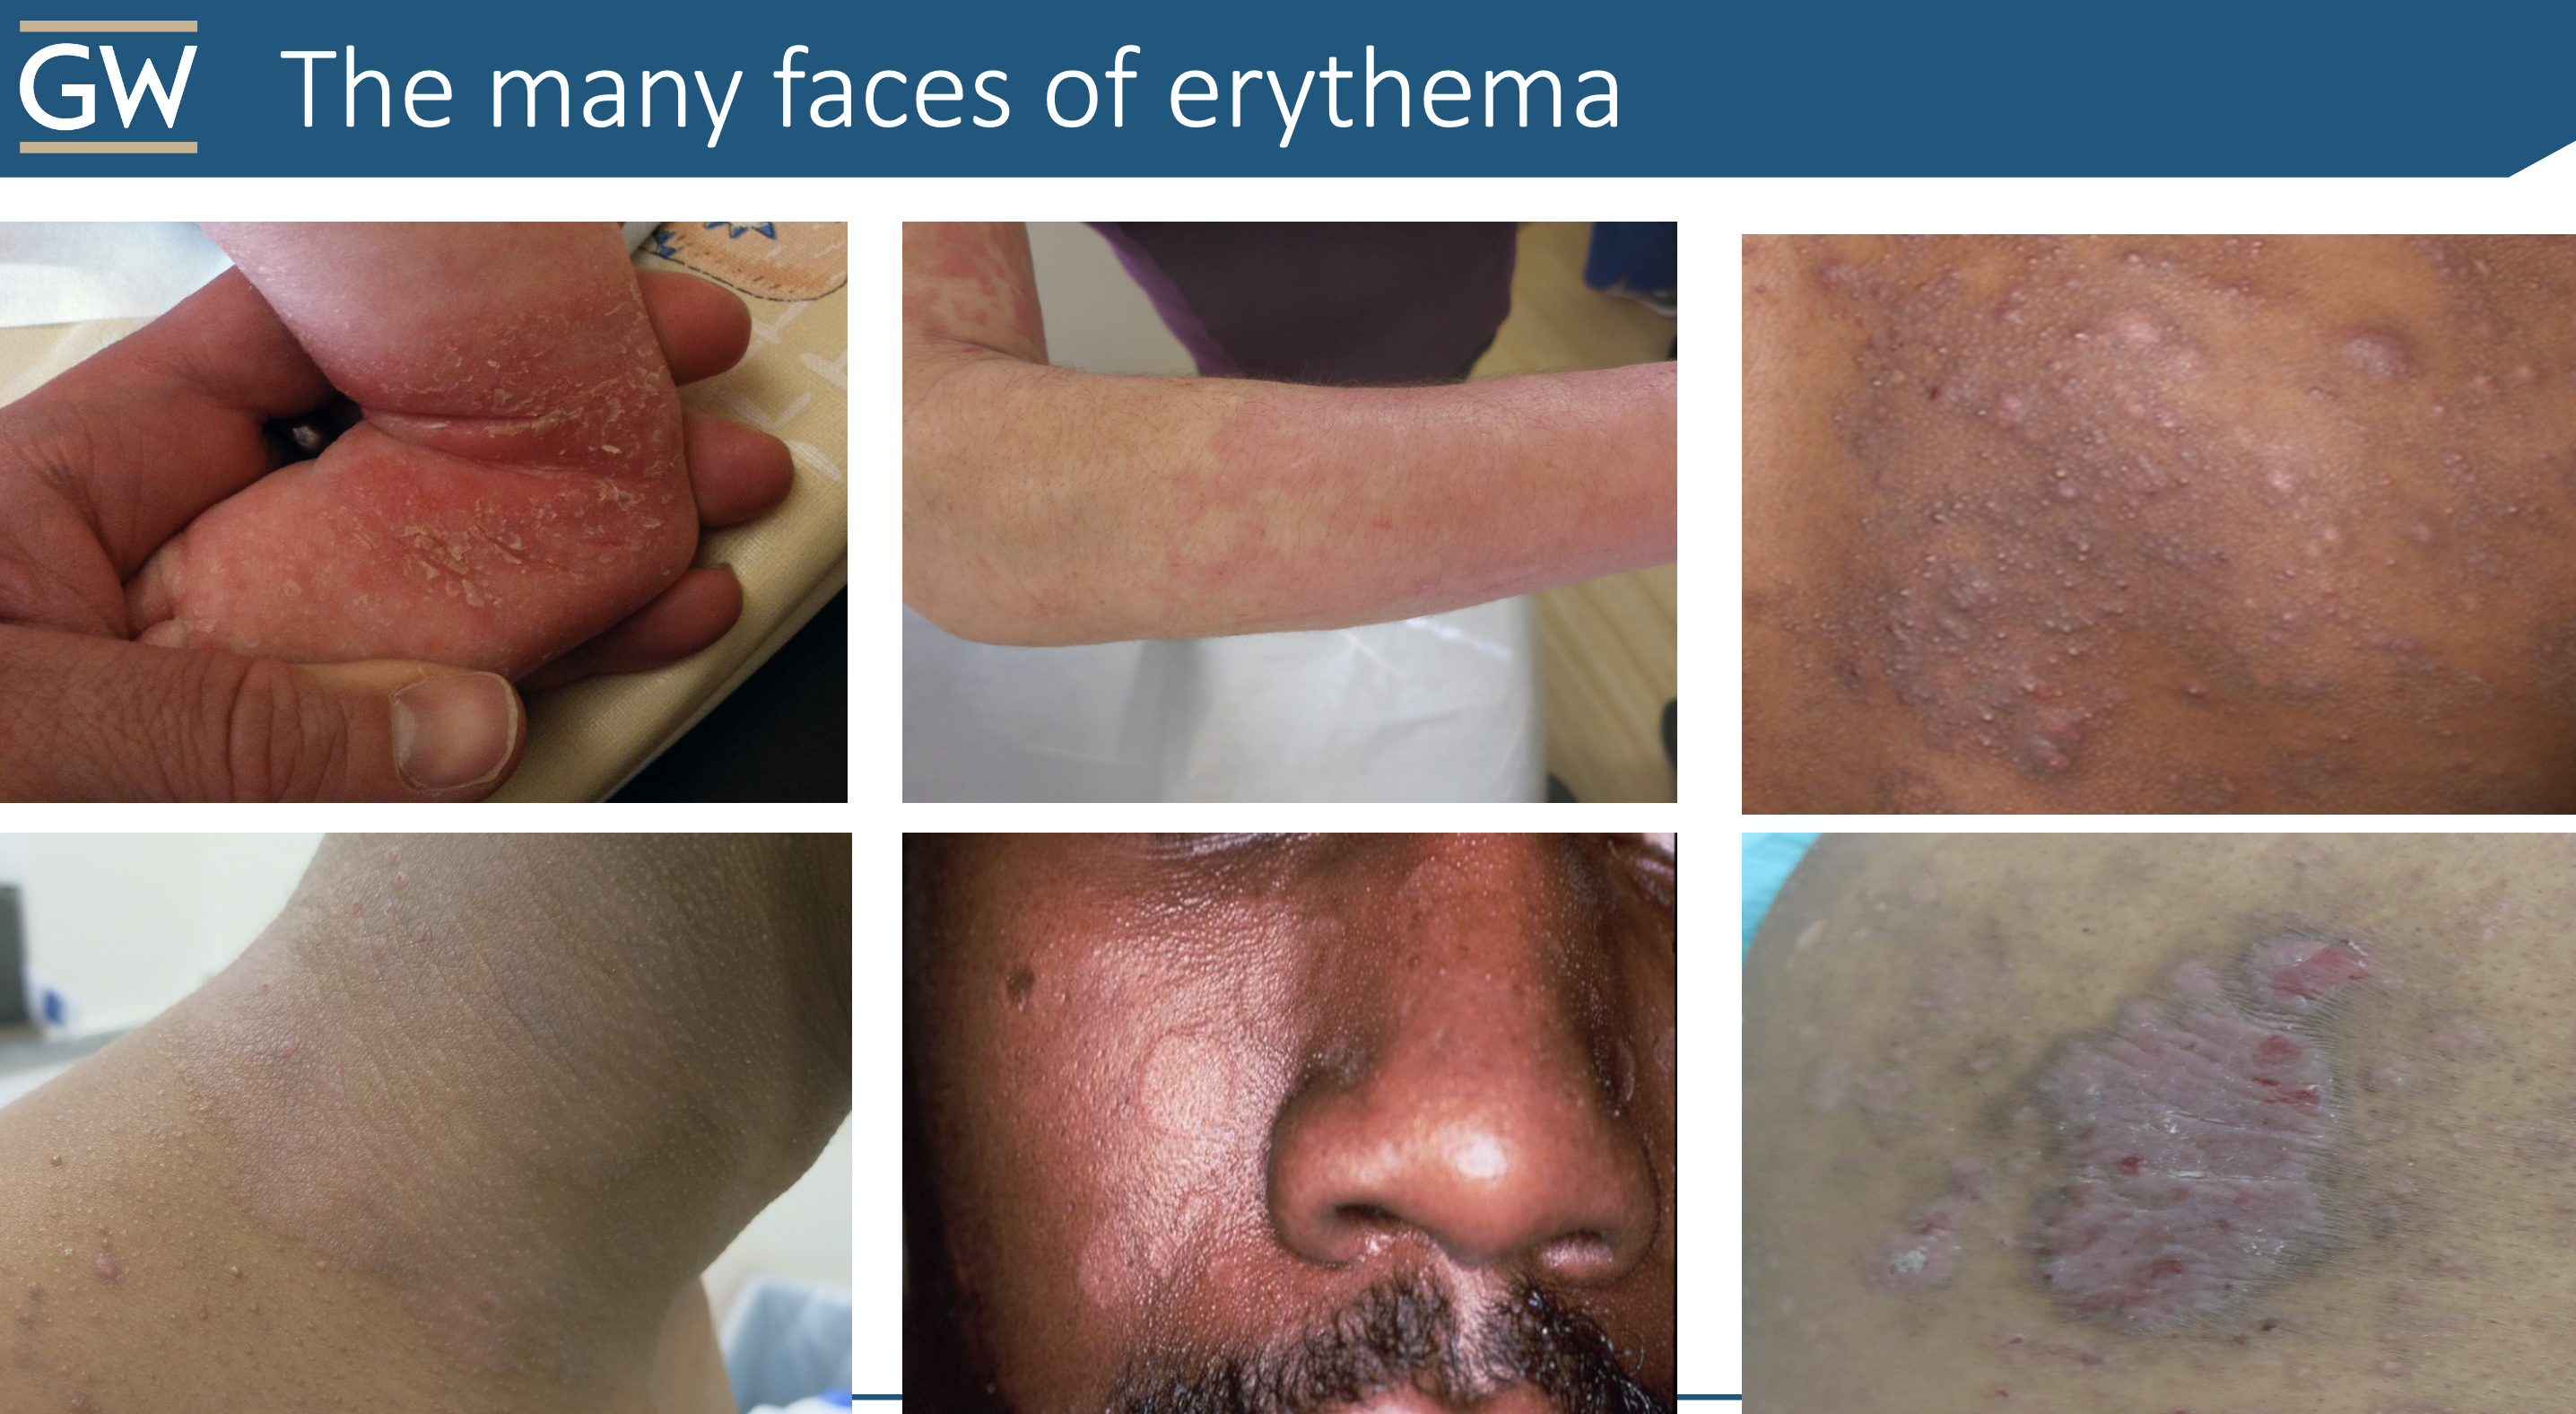 The many faces of erythema